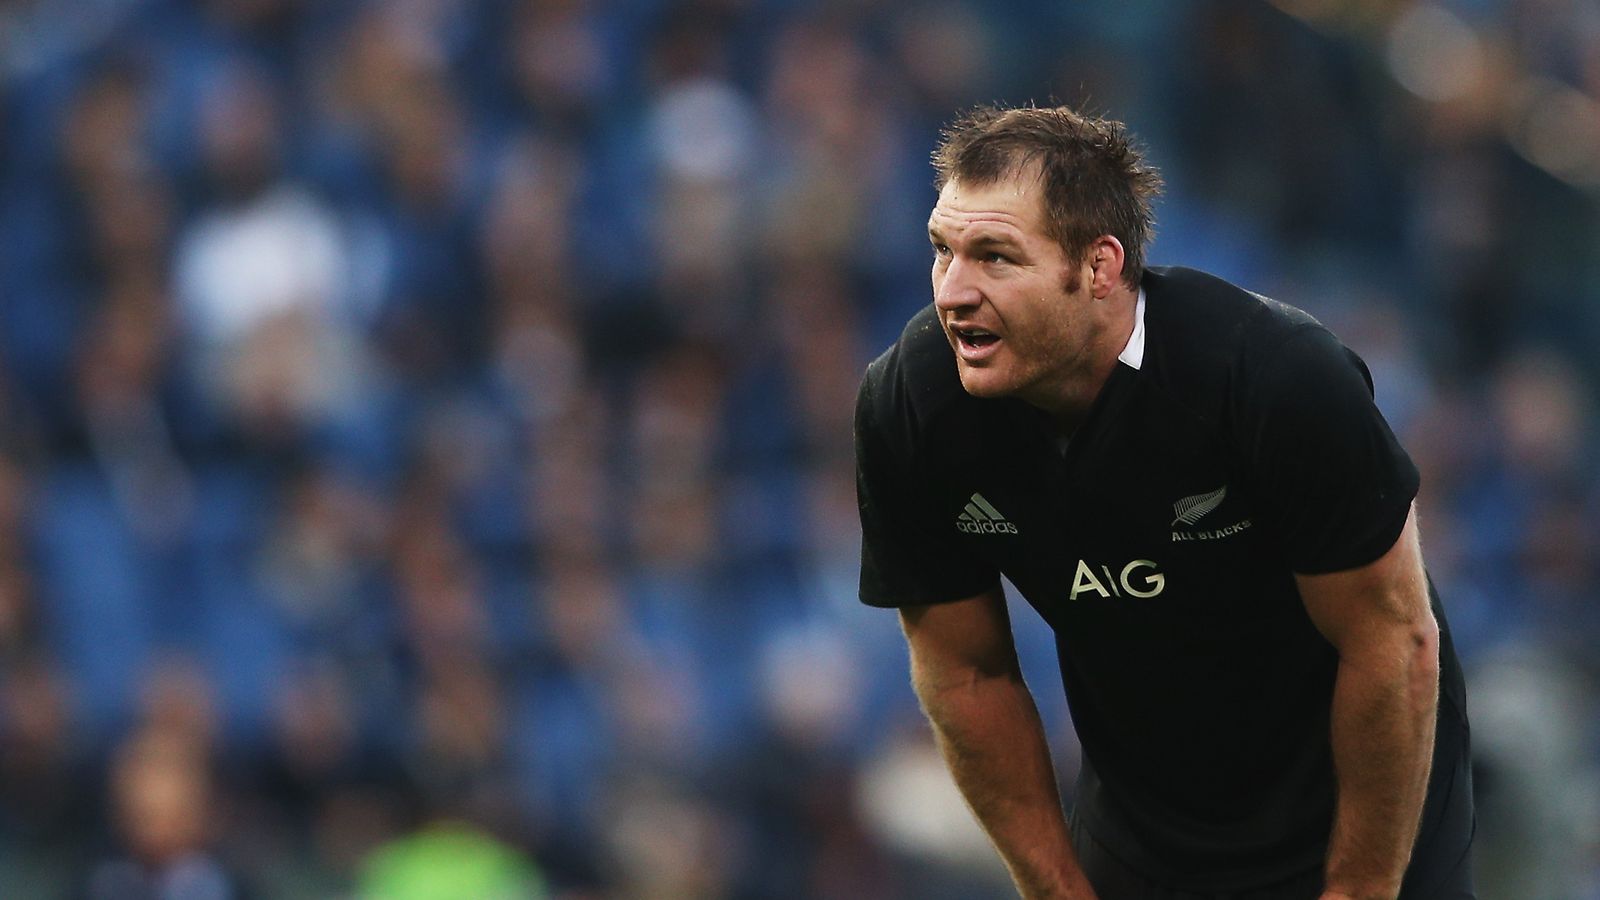 Former All Black Ali Williams fined for buying cocaine